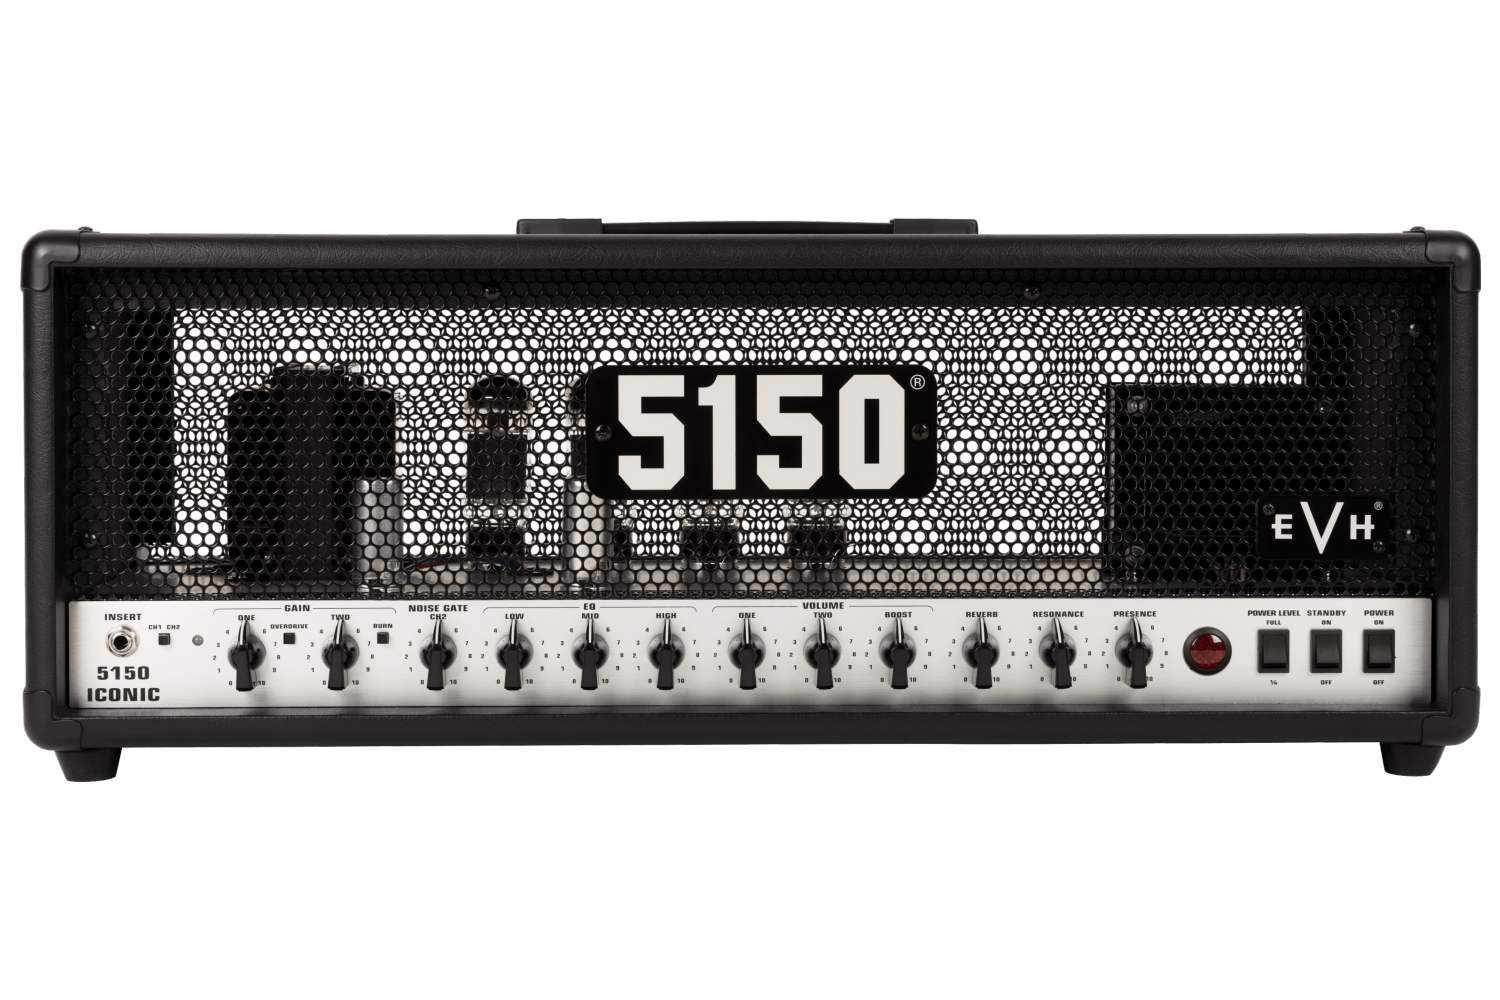 evh 5150 iconic series 80w head review